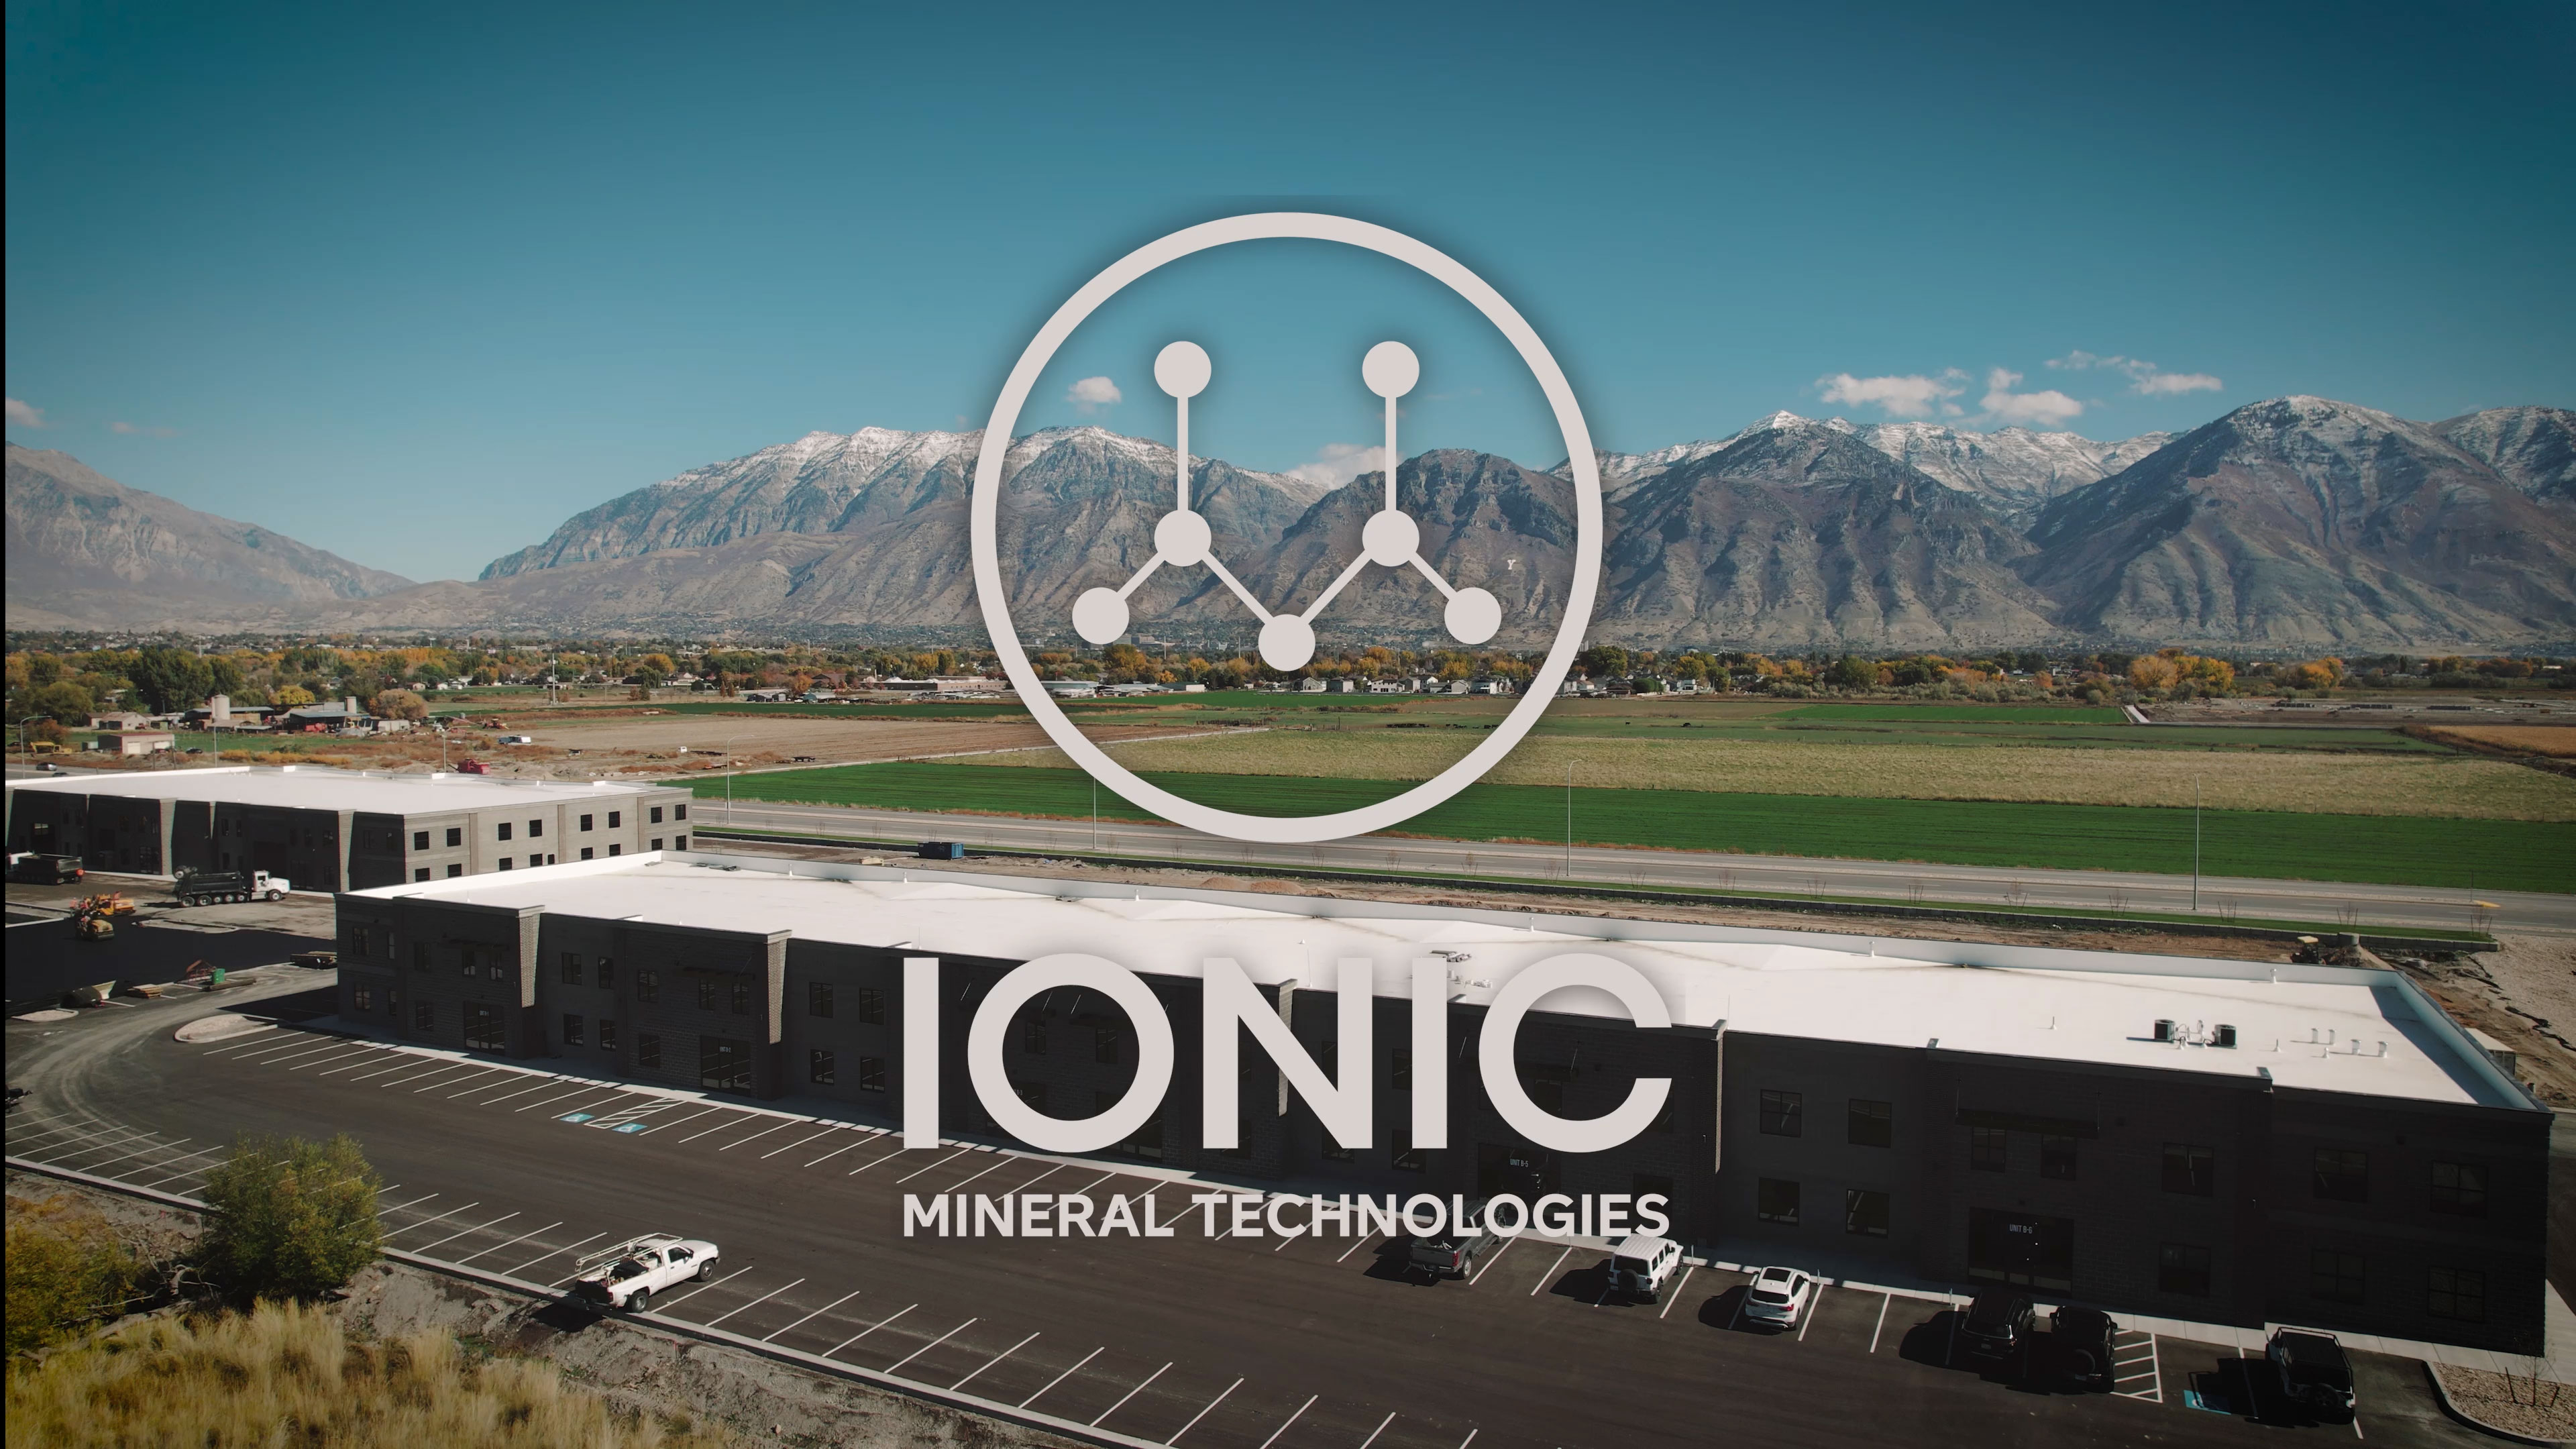 Ionic MT celebrates the grand opening of its new 37,000 sq. ft. production facility, technical center and flagship headquarters in Provo, Utah.